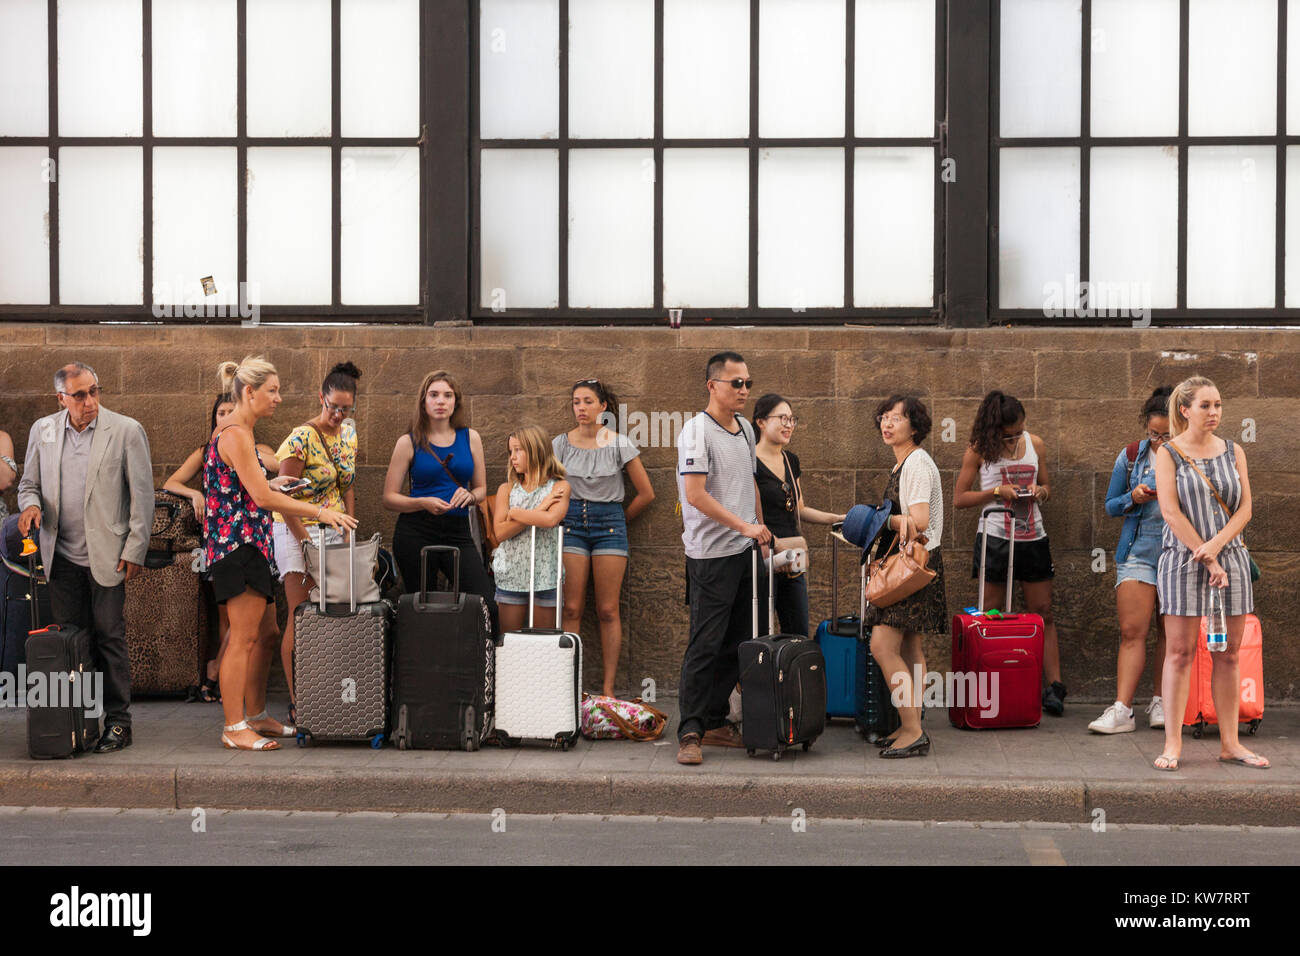 people waiting in line at a bus stop, Florence, Italy Stock Photo